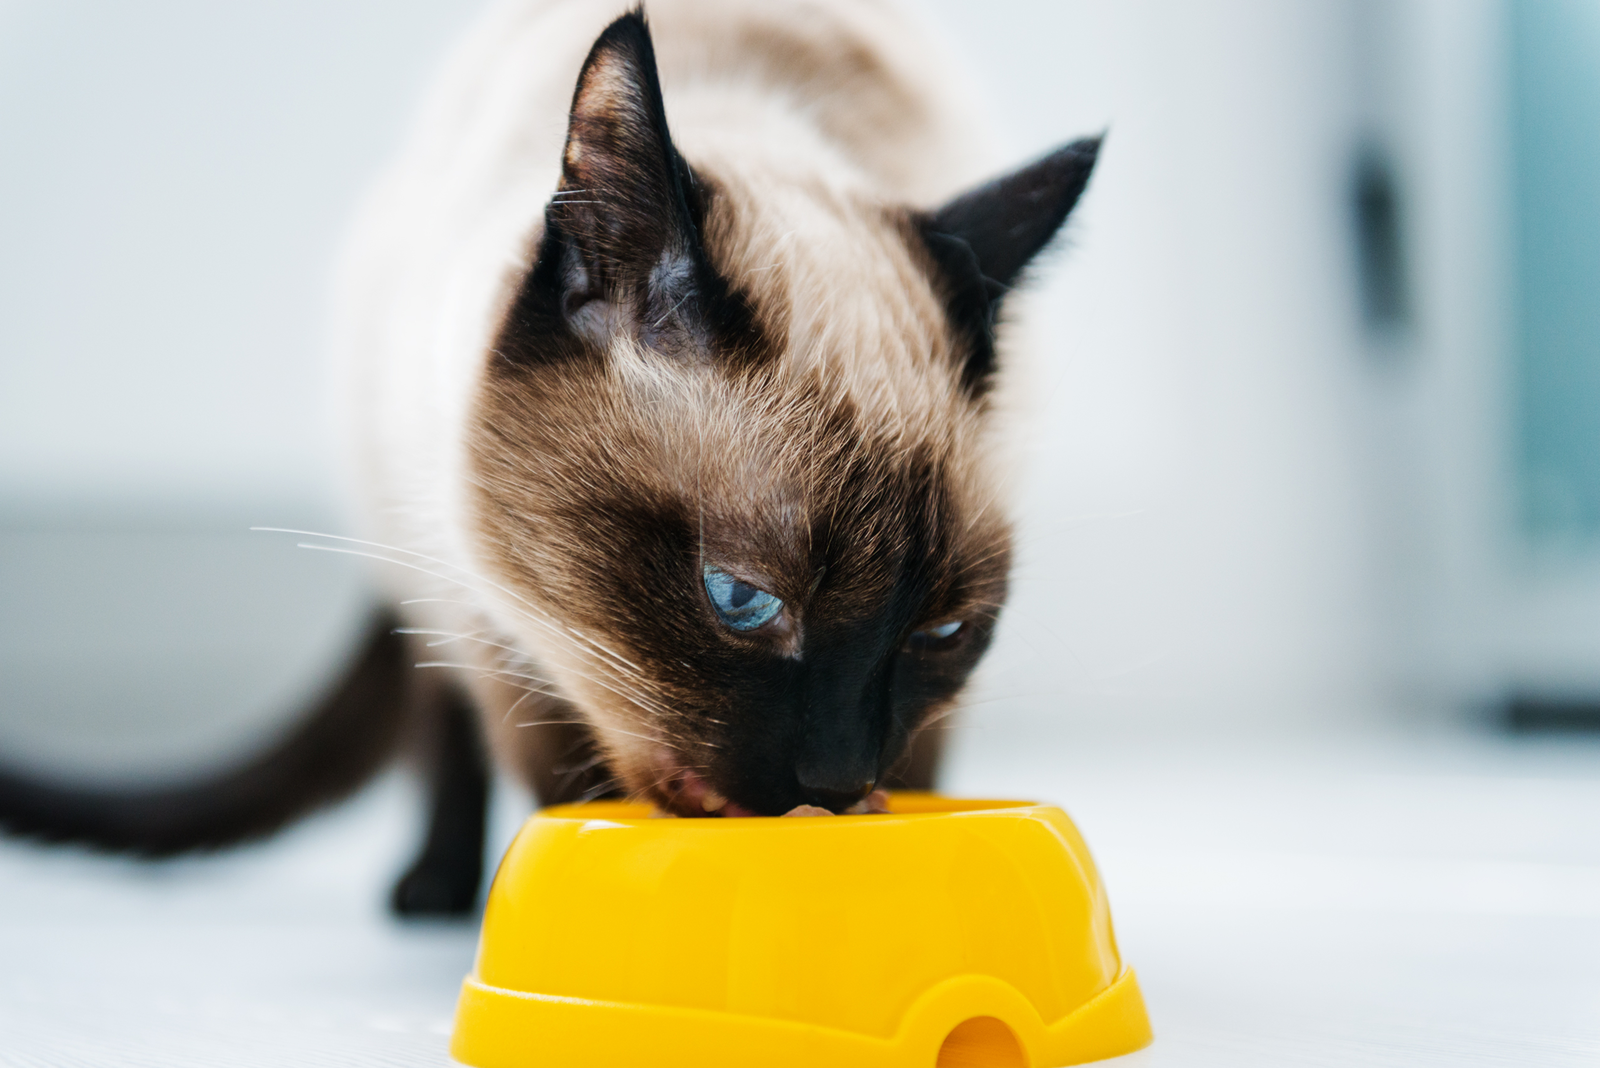 Dangers of contaminated pet food under study